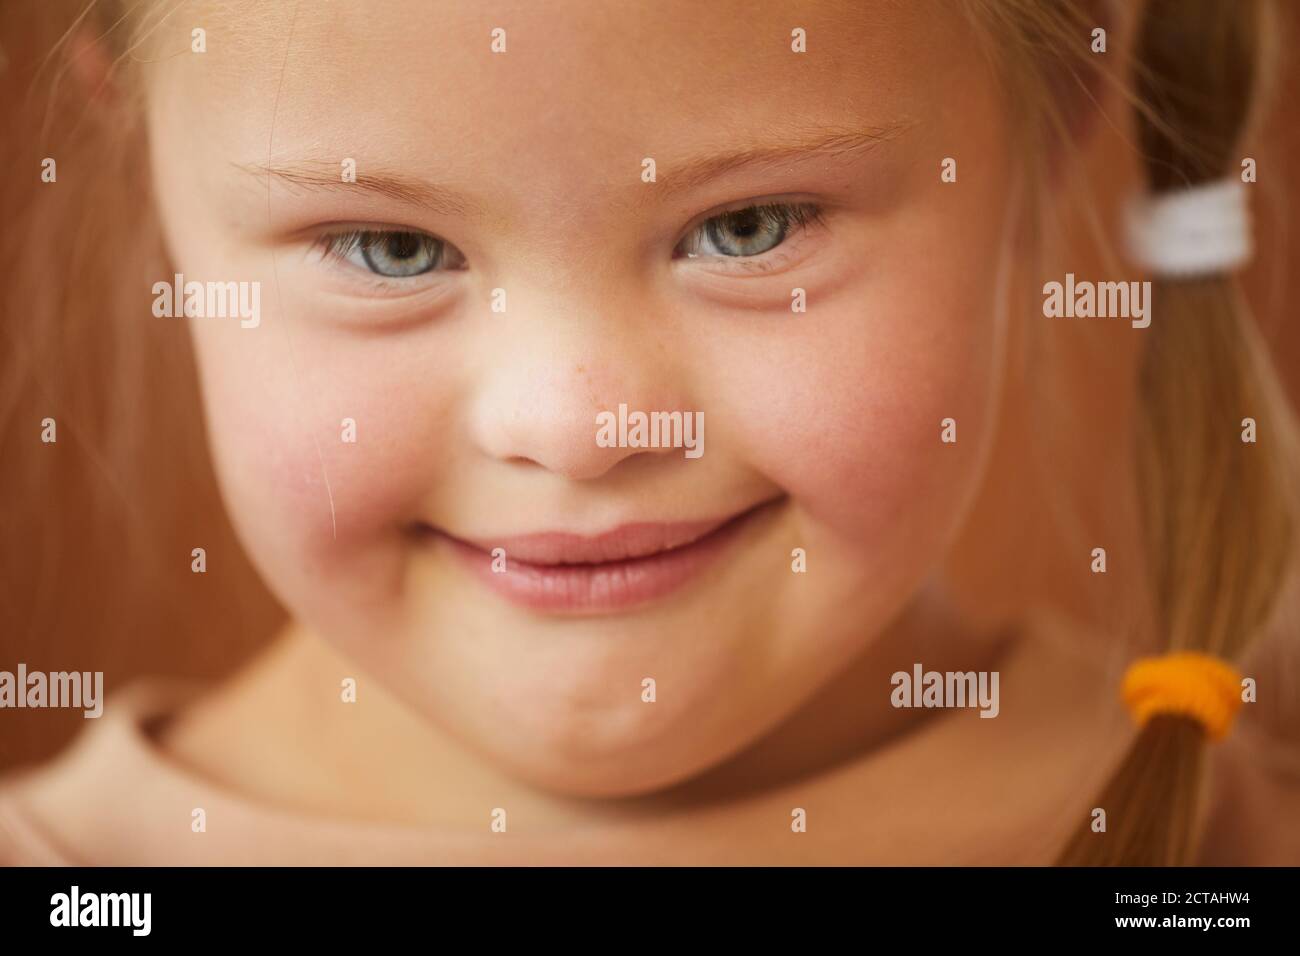 Close up portrait of cute girl with down syndrome smiling at camera happily, studio shot Stock Photo